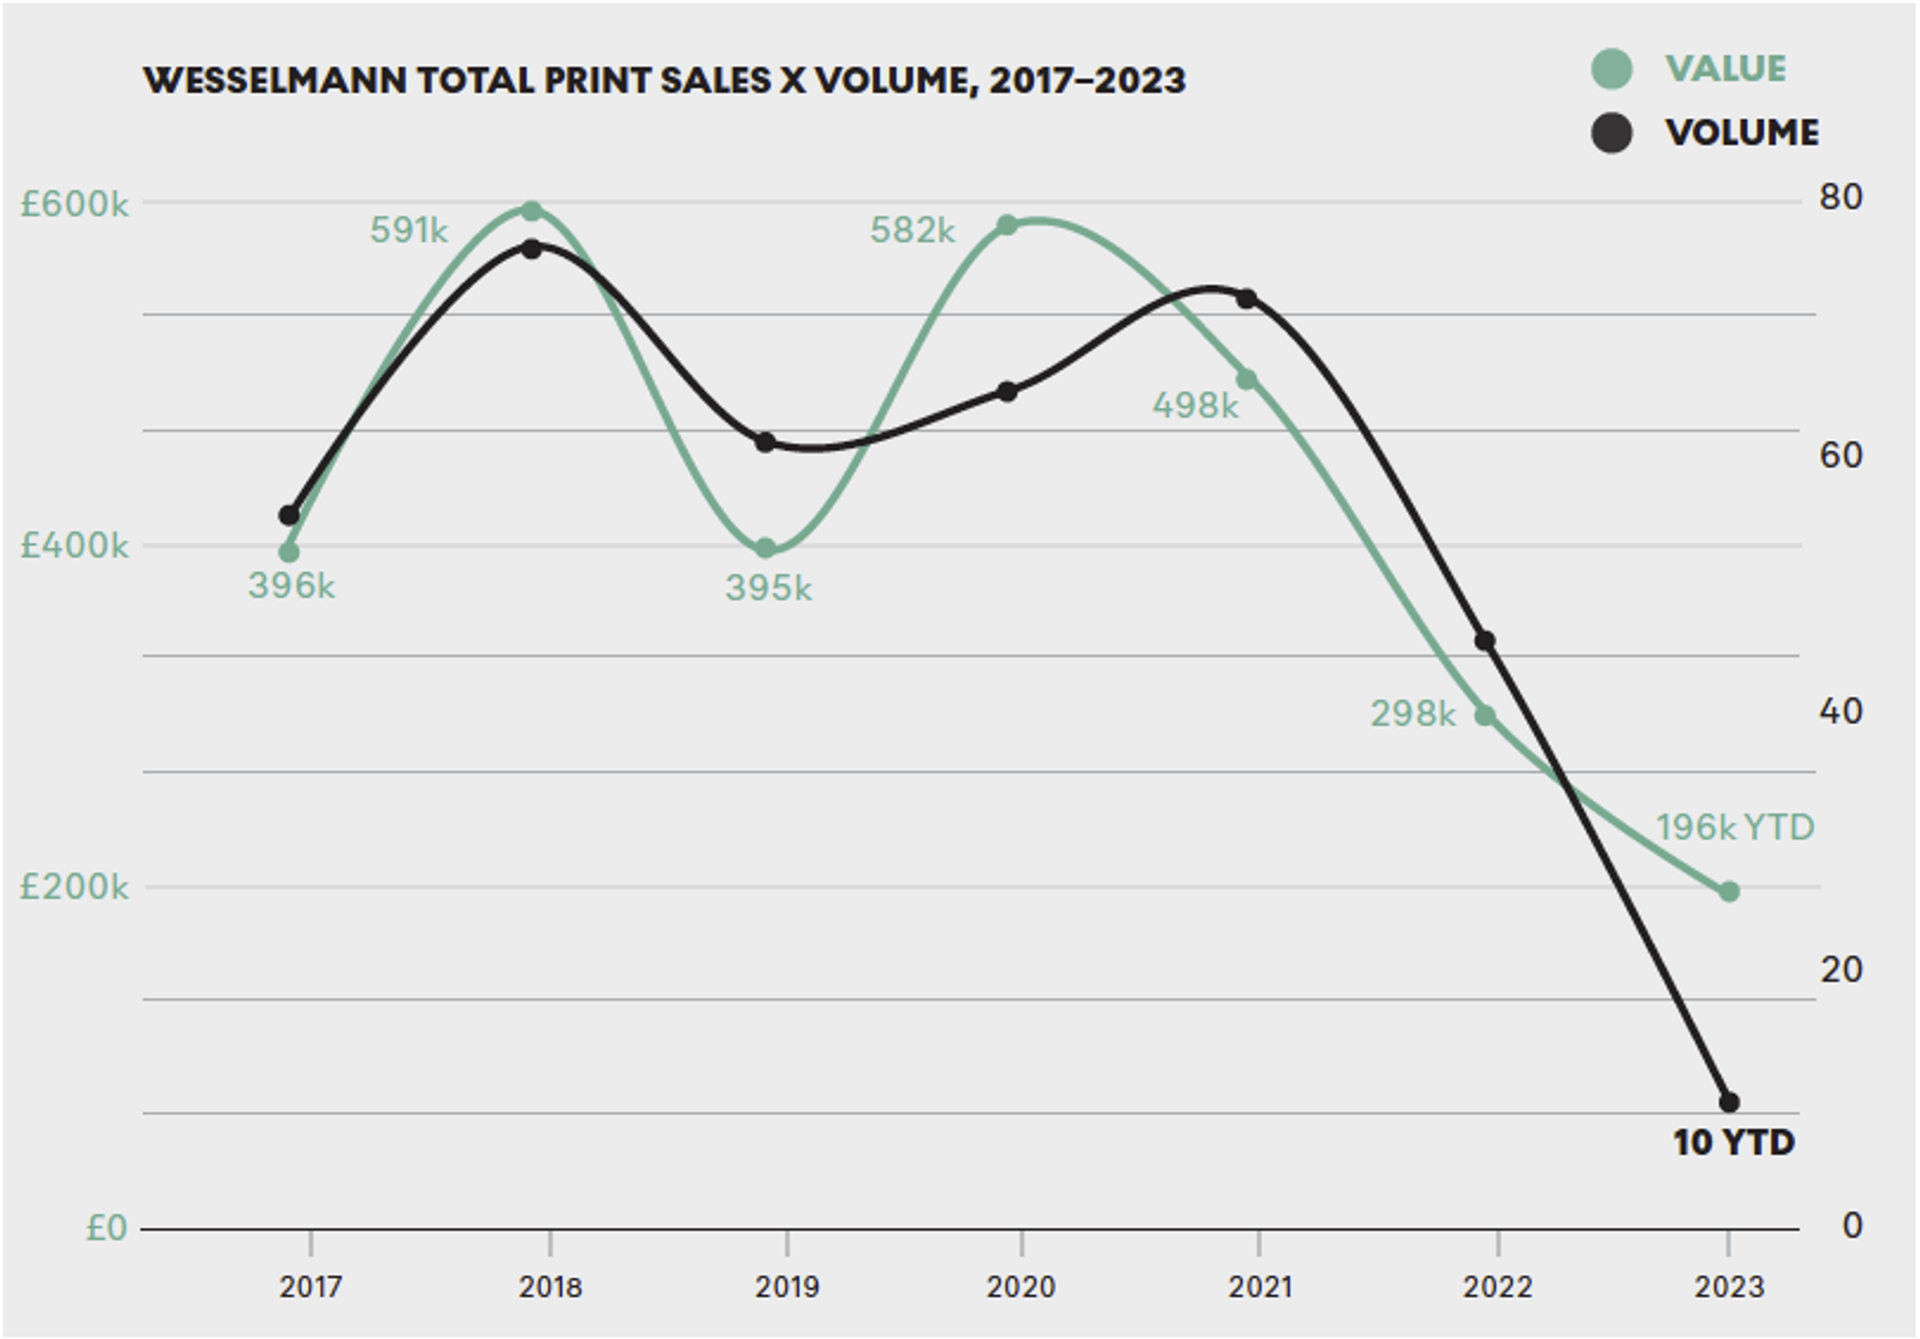 A double line graph depicting the print market performance of Tome Wesselmann over the past five years. The graph showcases annual total sales turnover and transaction volume from 2017 to 2023.